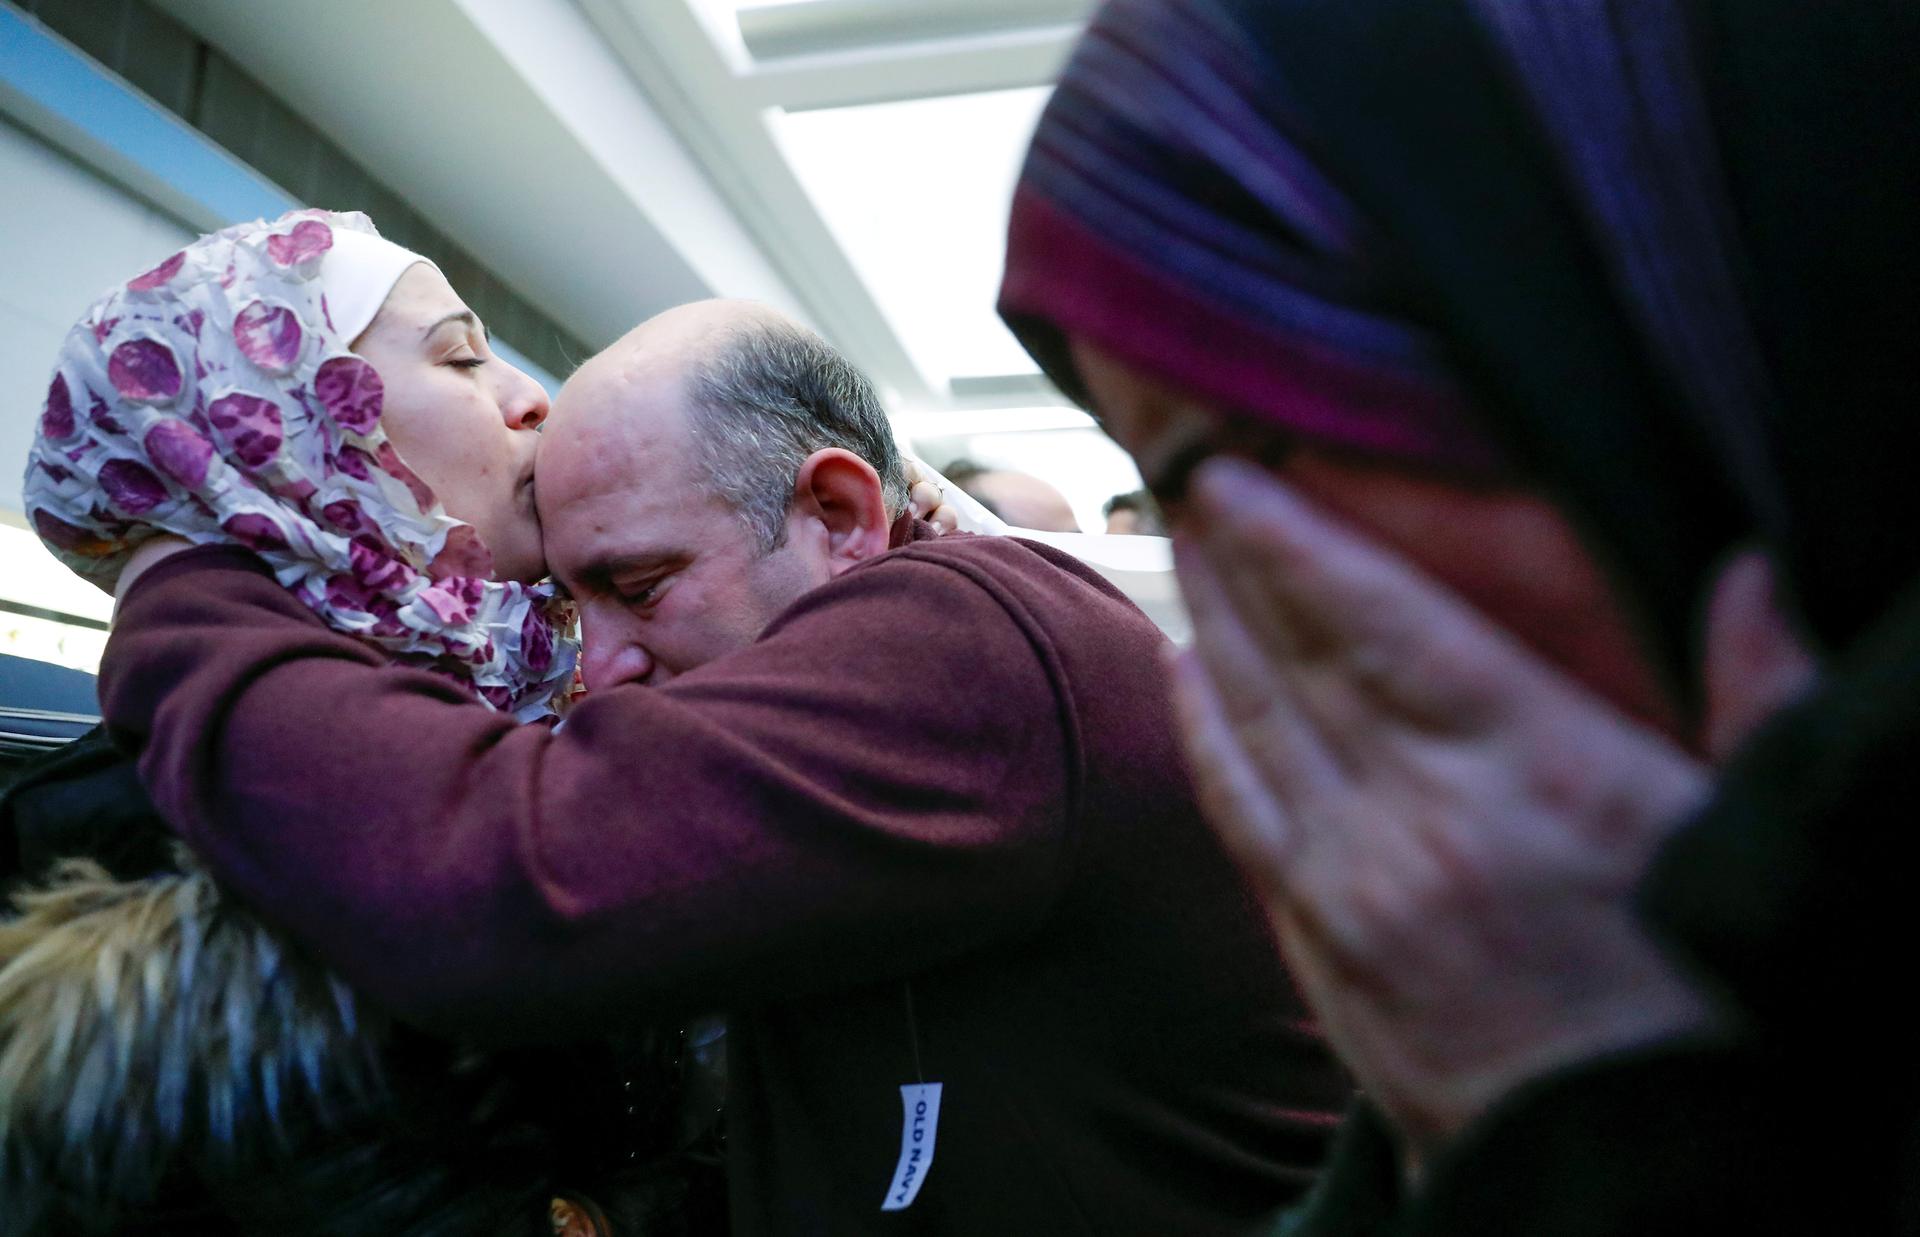 Syrian refugee Baraa Haj Khalaf (left) kisses her father Khaled as her mother Fattoum (right) cries after arriving at O'Hare International Airport in Chicago on February 7, 2017. 